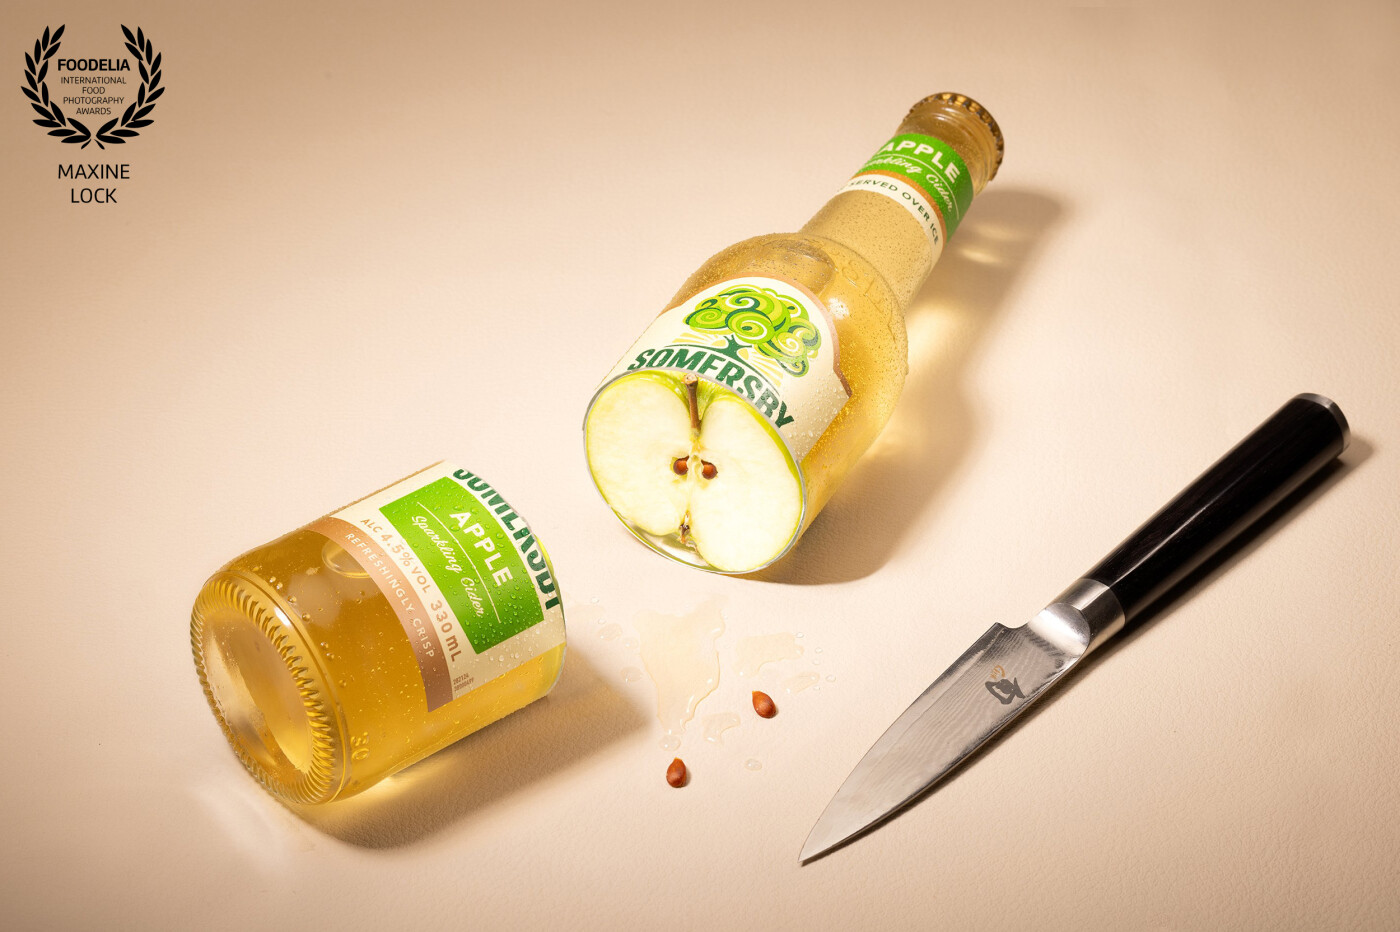 An apple cider bottle "sliced" opened and ready to be served!